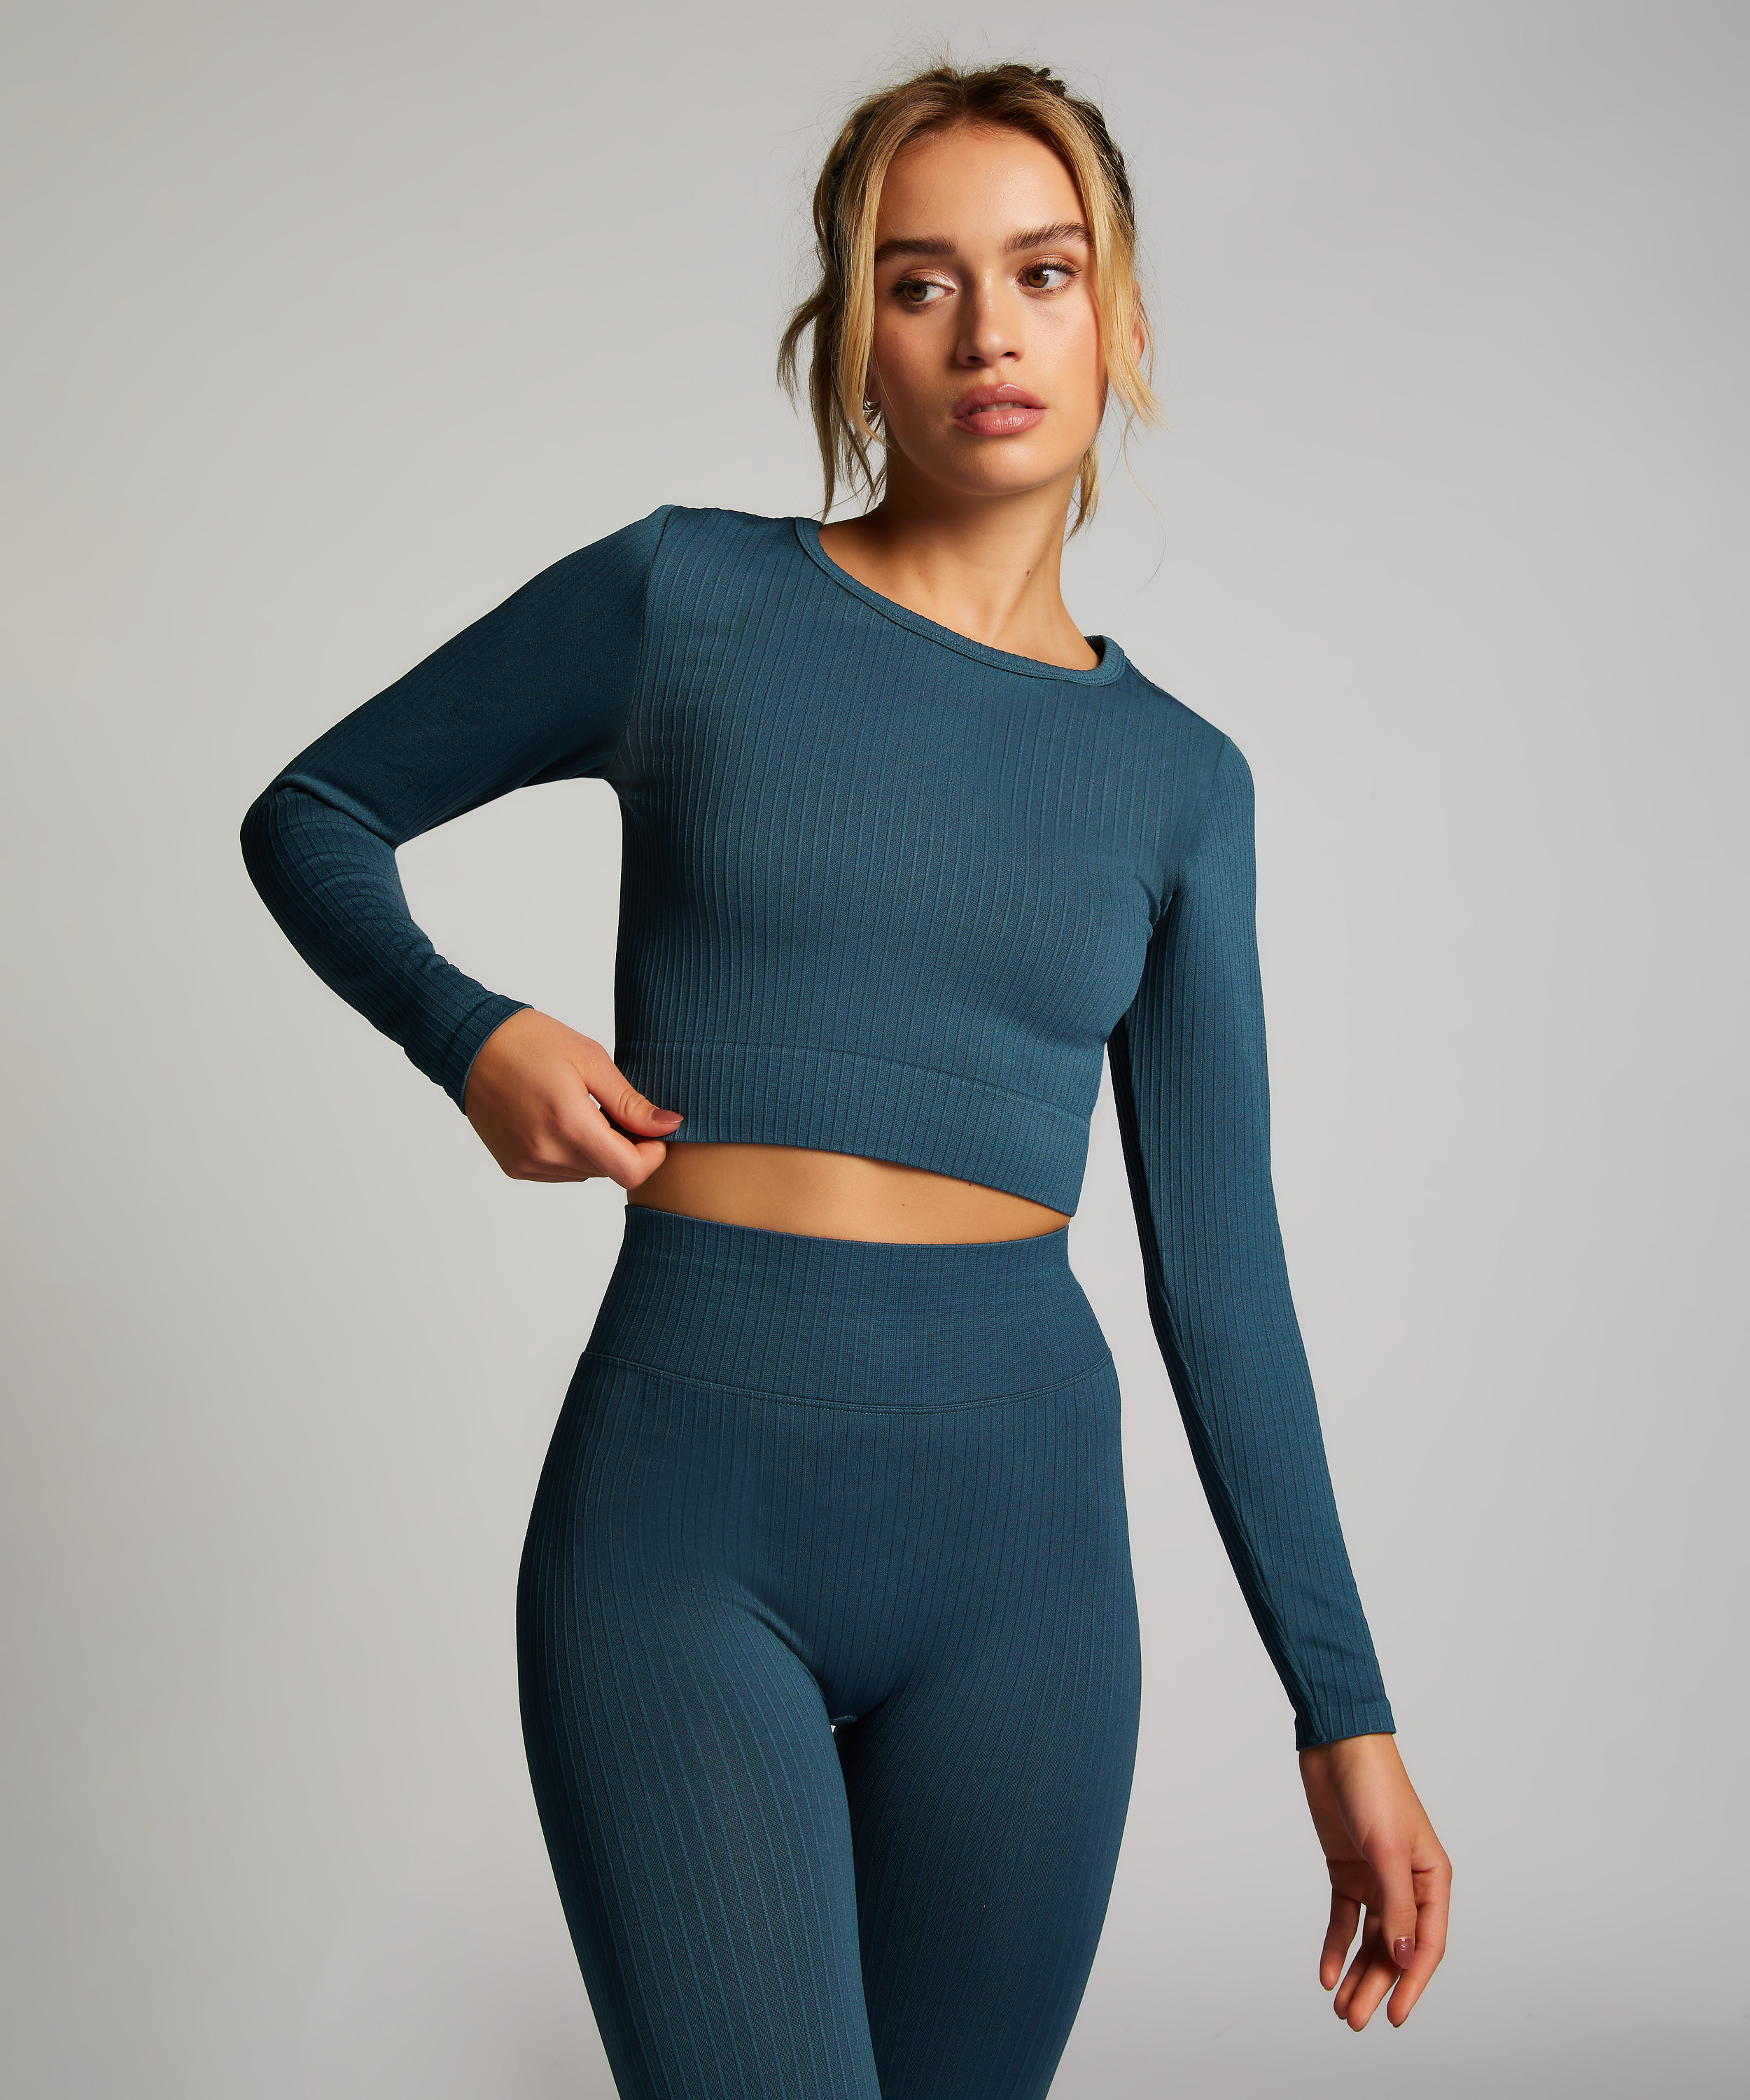 HKMX Seamless Sport Cropped Top, Blue, main